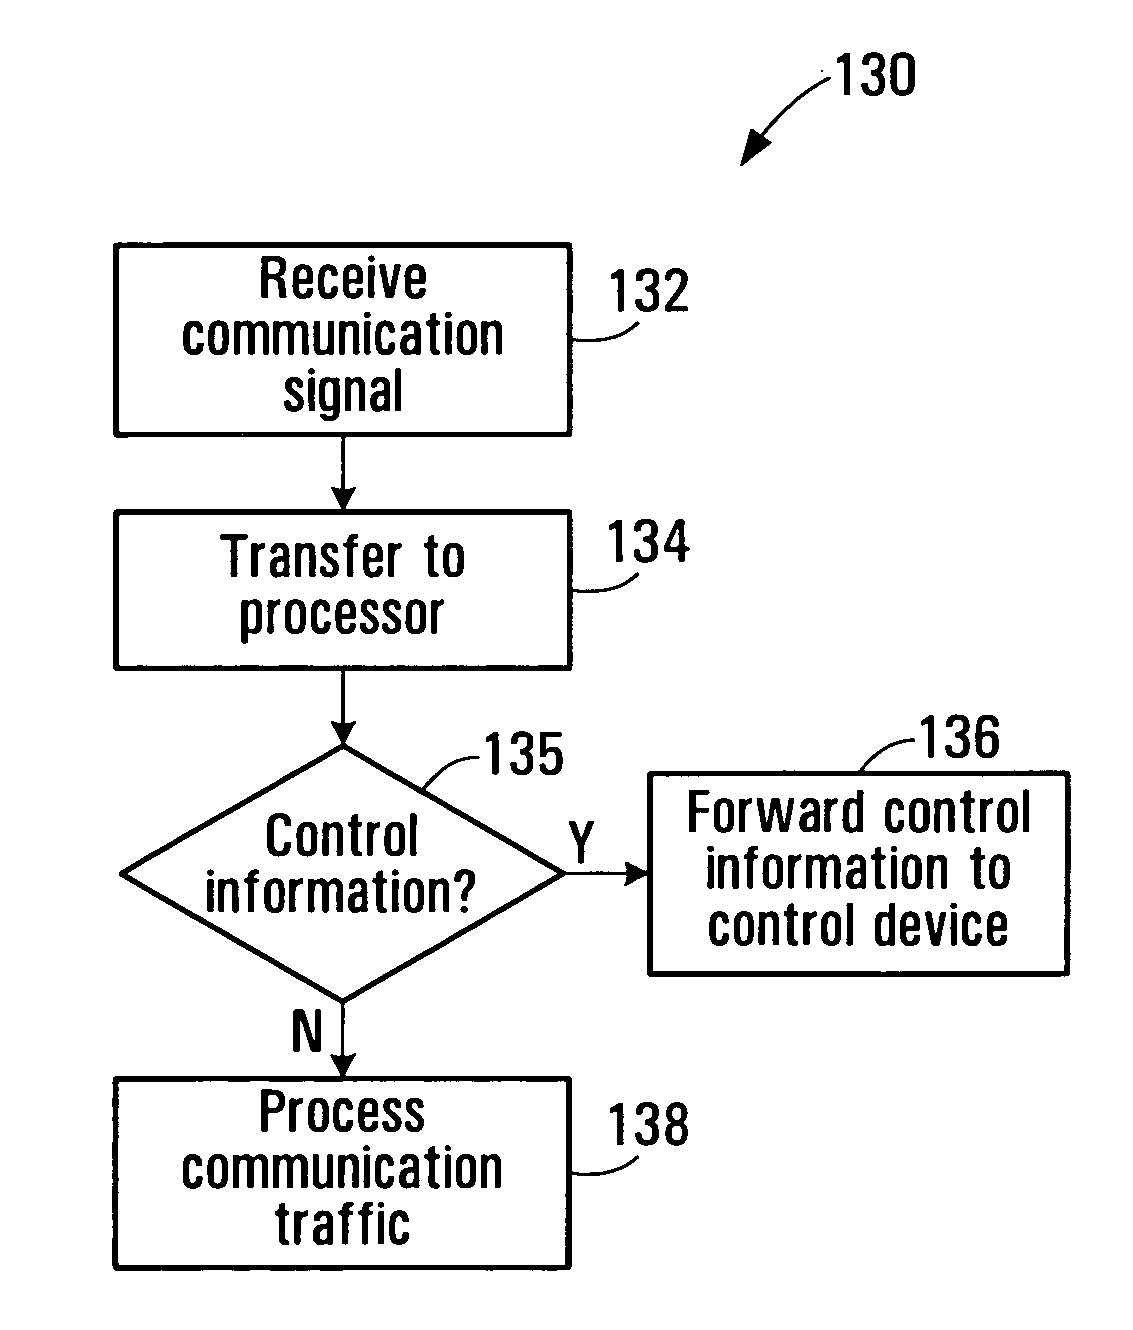 Remote control and control redundancy for distributed communication equipment